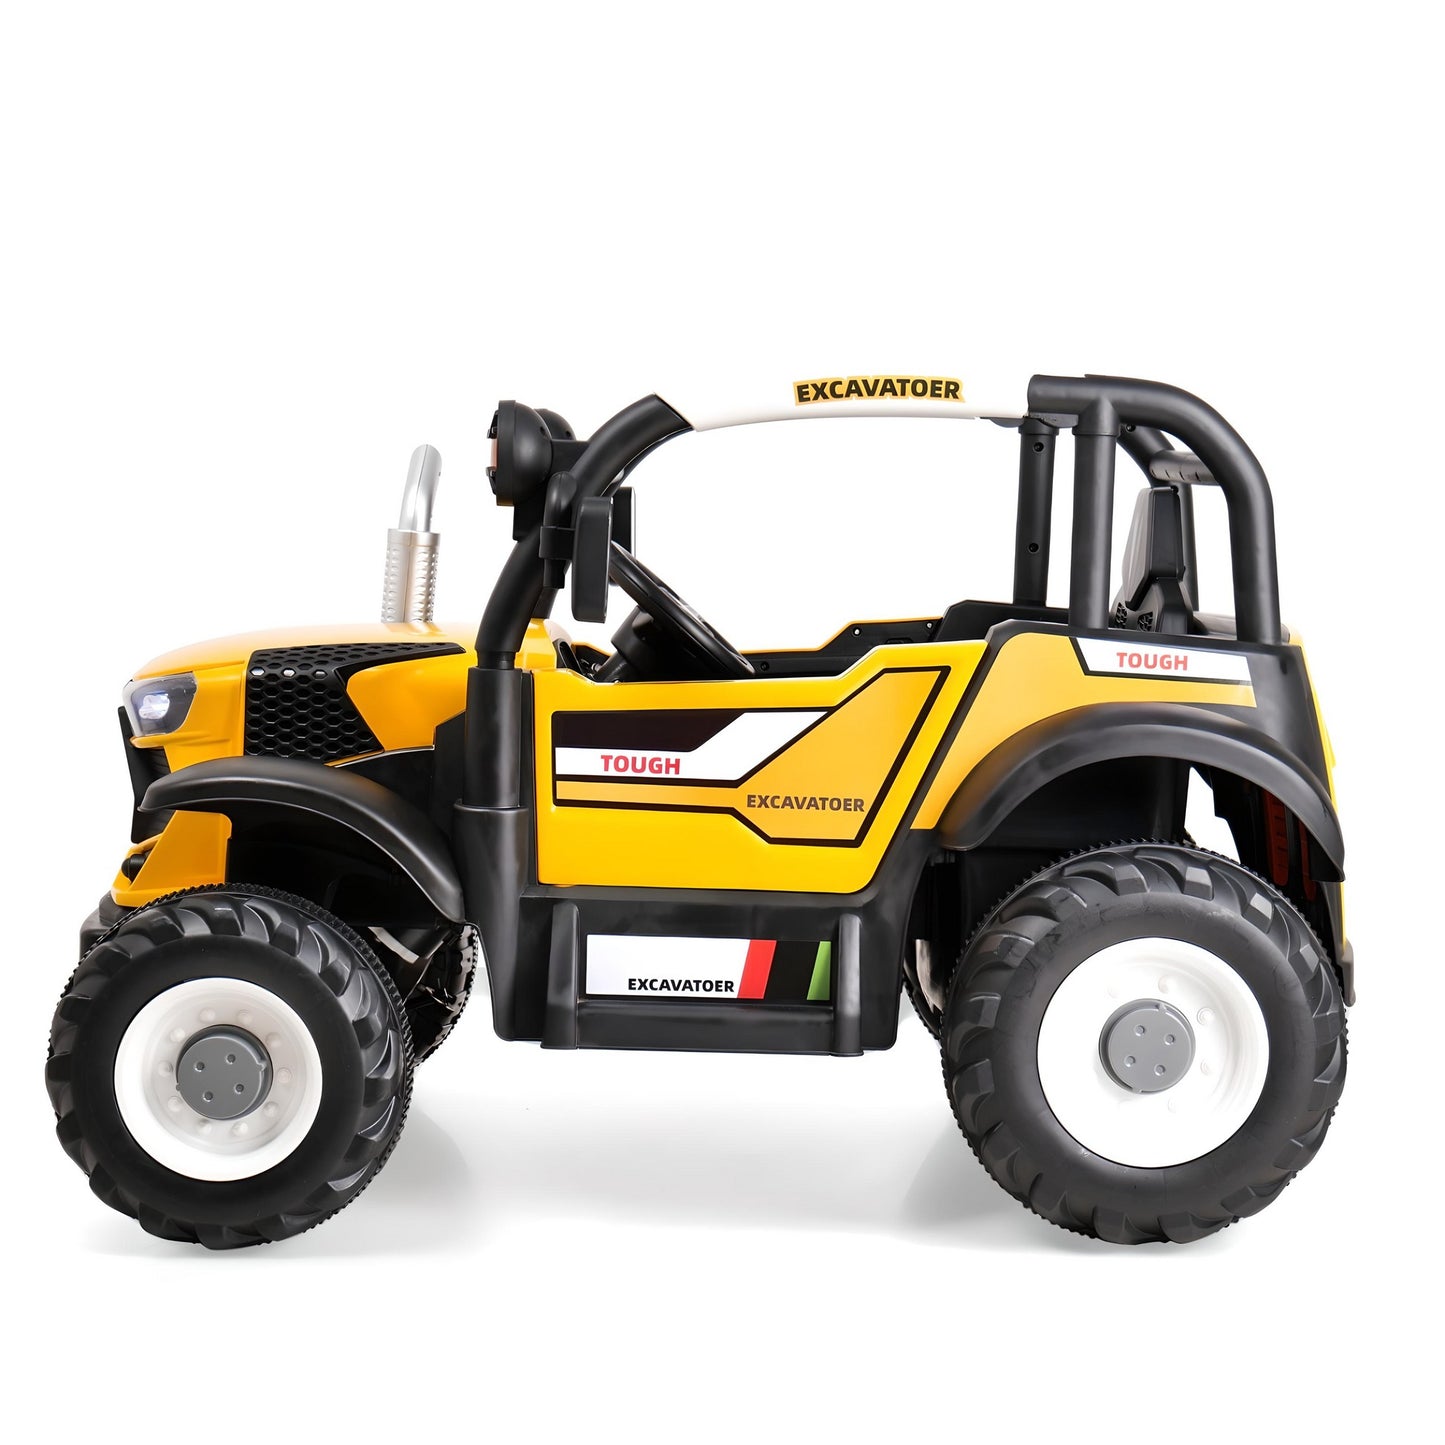 AYAAN TOYS a top-Tier Kids Electric Ride-On Tractor Featuring Dual Control, Realistic Design, Musical Entertainment, Safe Driving Features, Durable, & Bluetooth Connectivity, Age 2-8 - Yellow